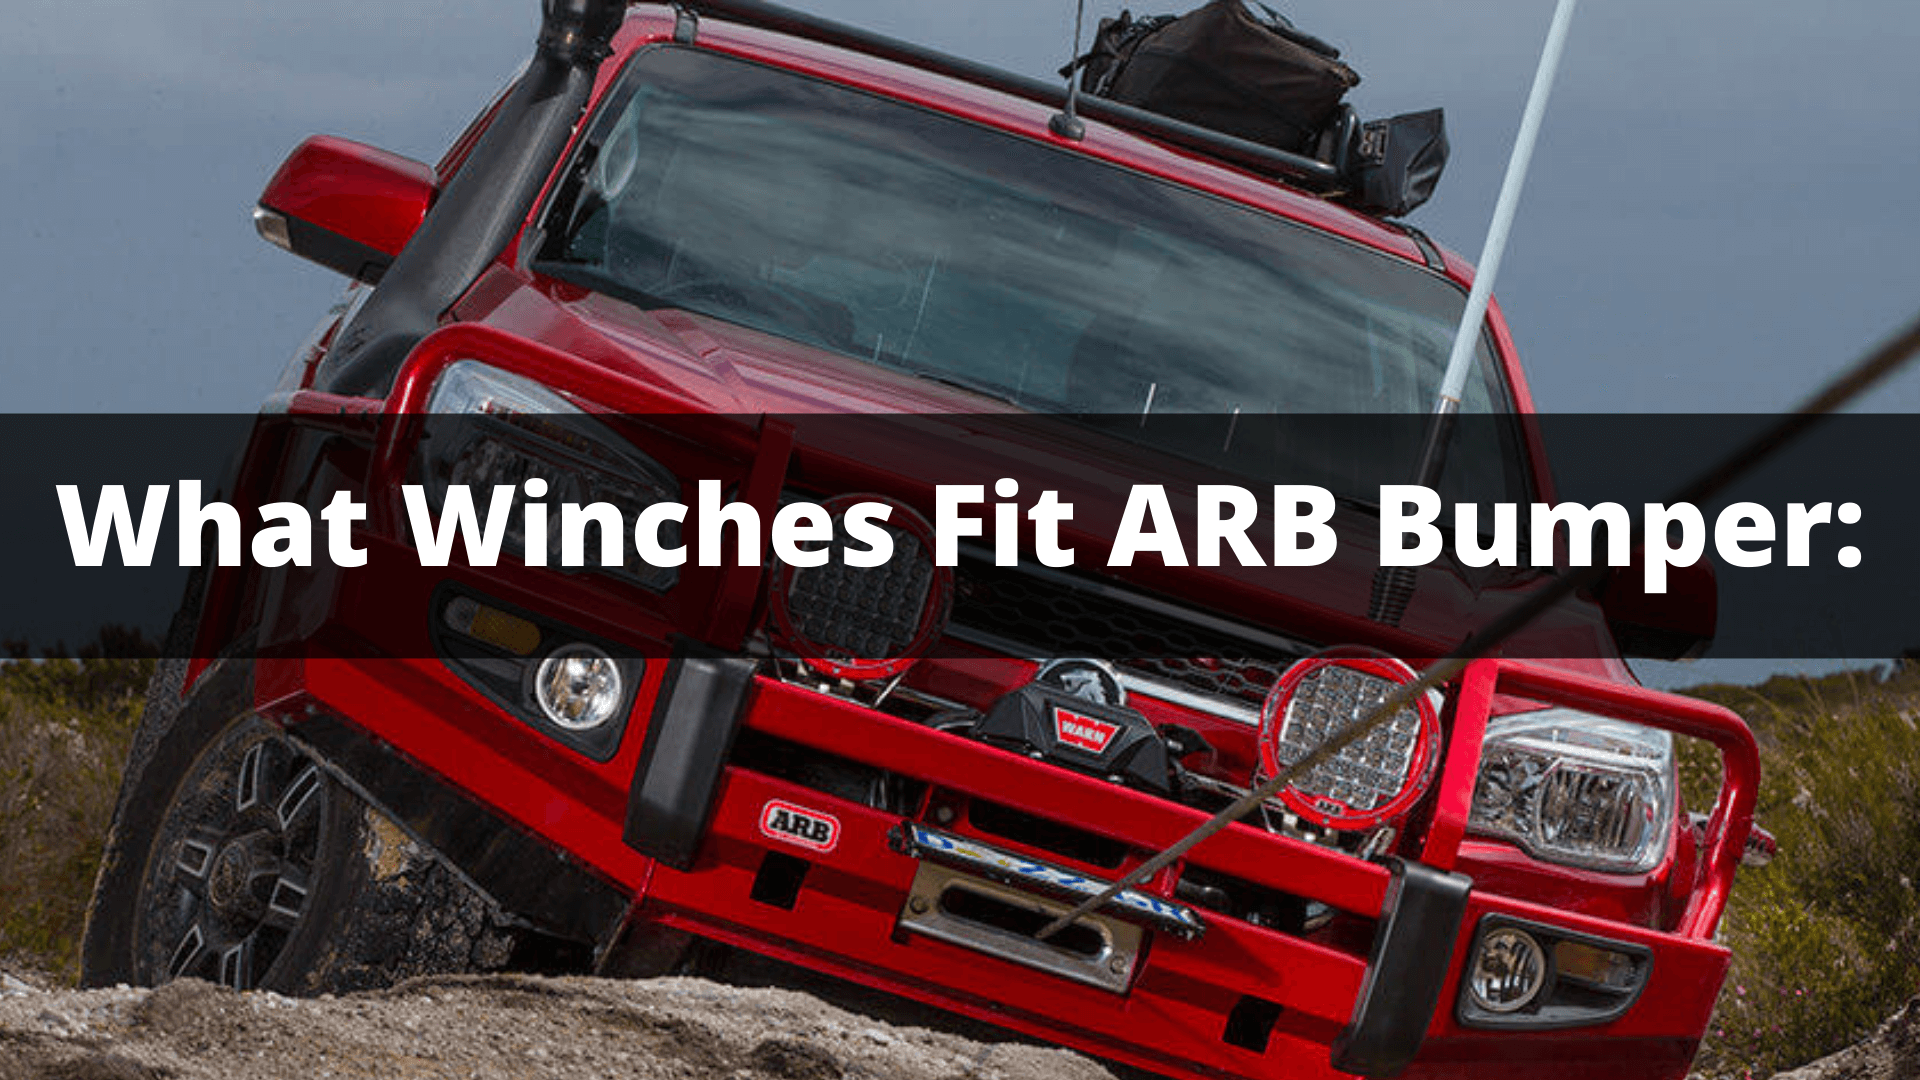 What Winches Fit ARB Bumper: